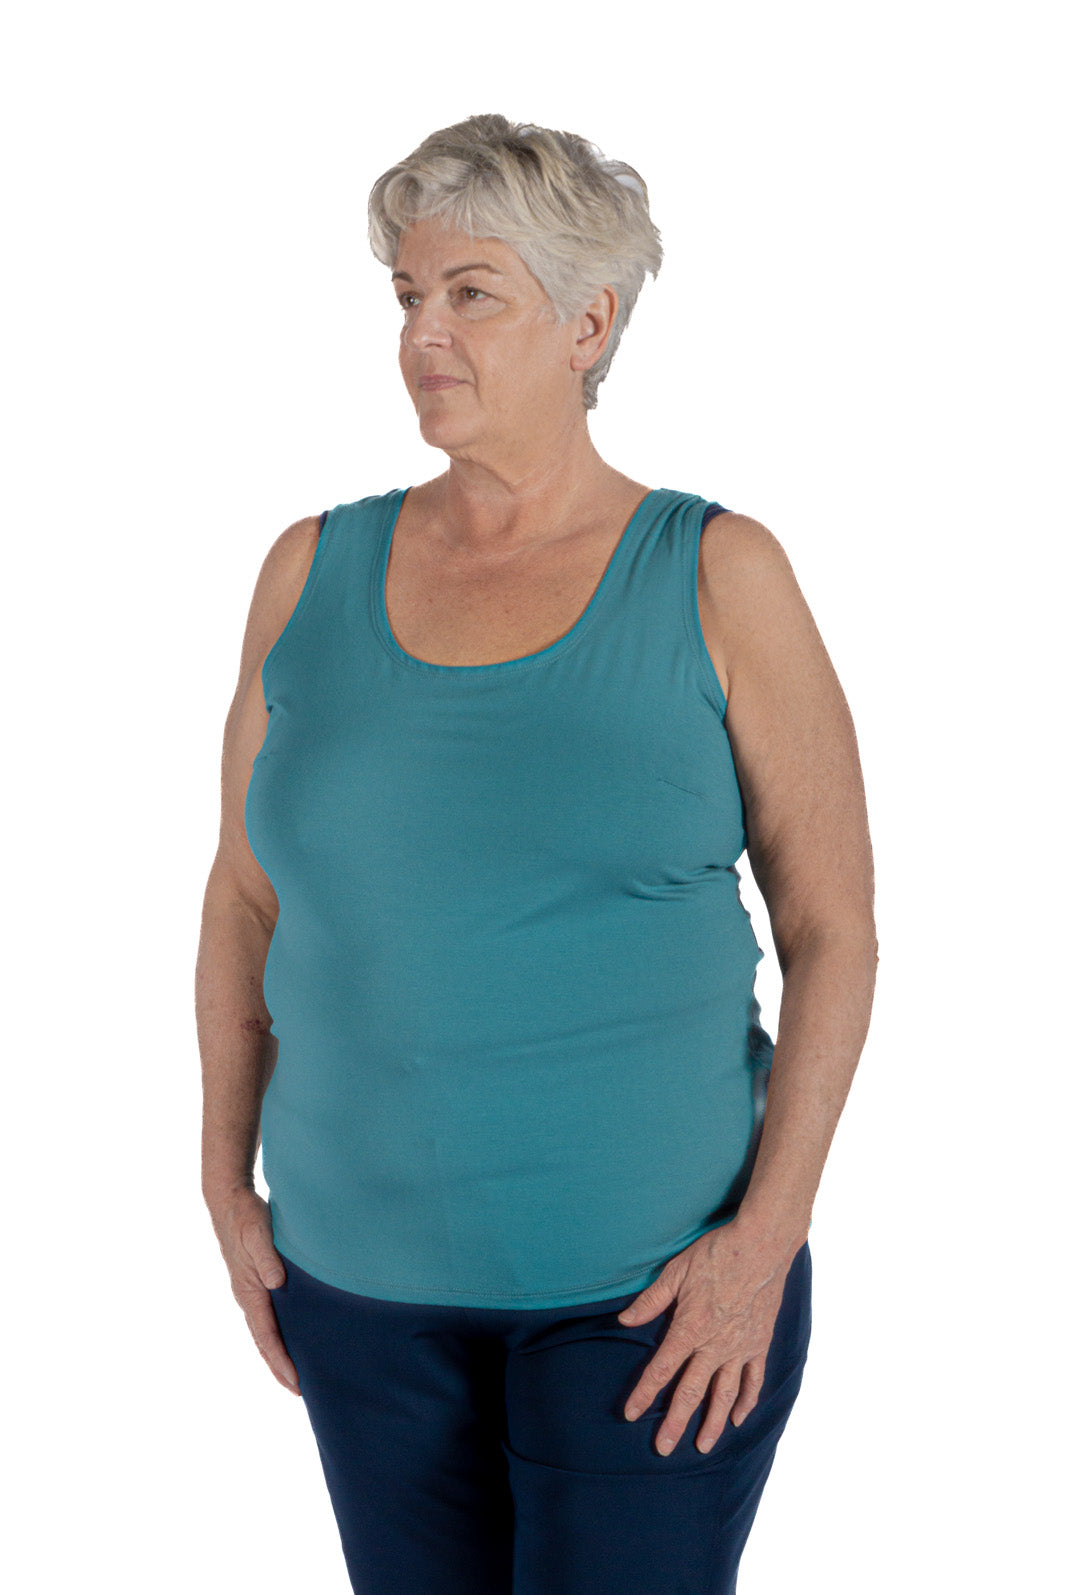 Plus Size Dundee Tank Top by Sportive Plus